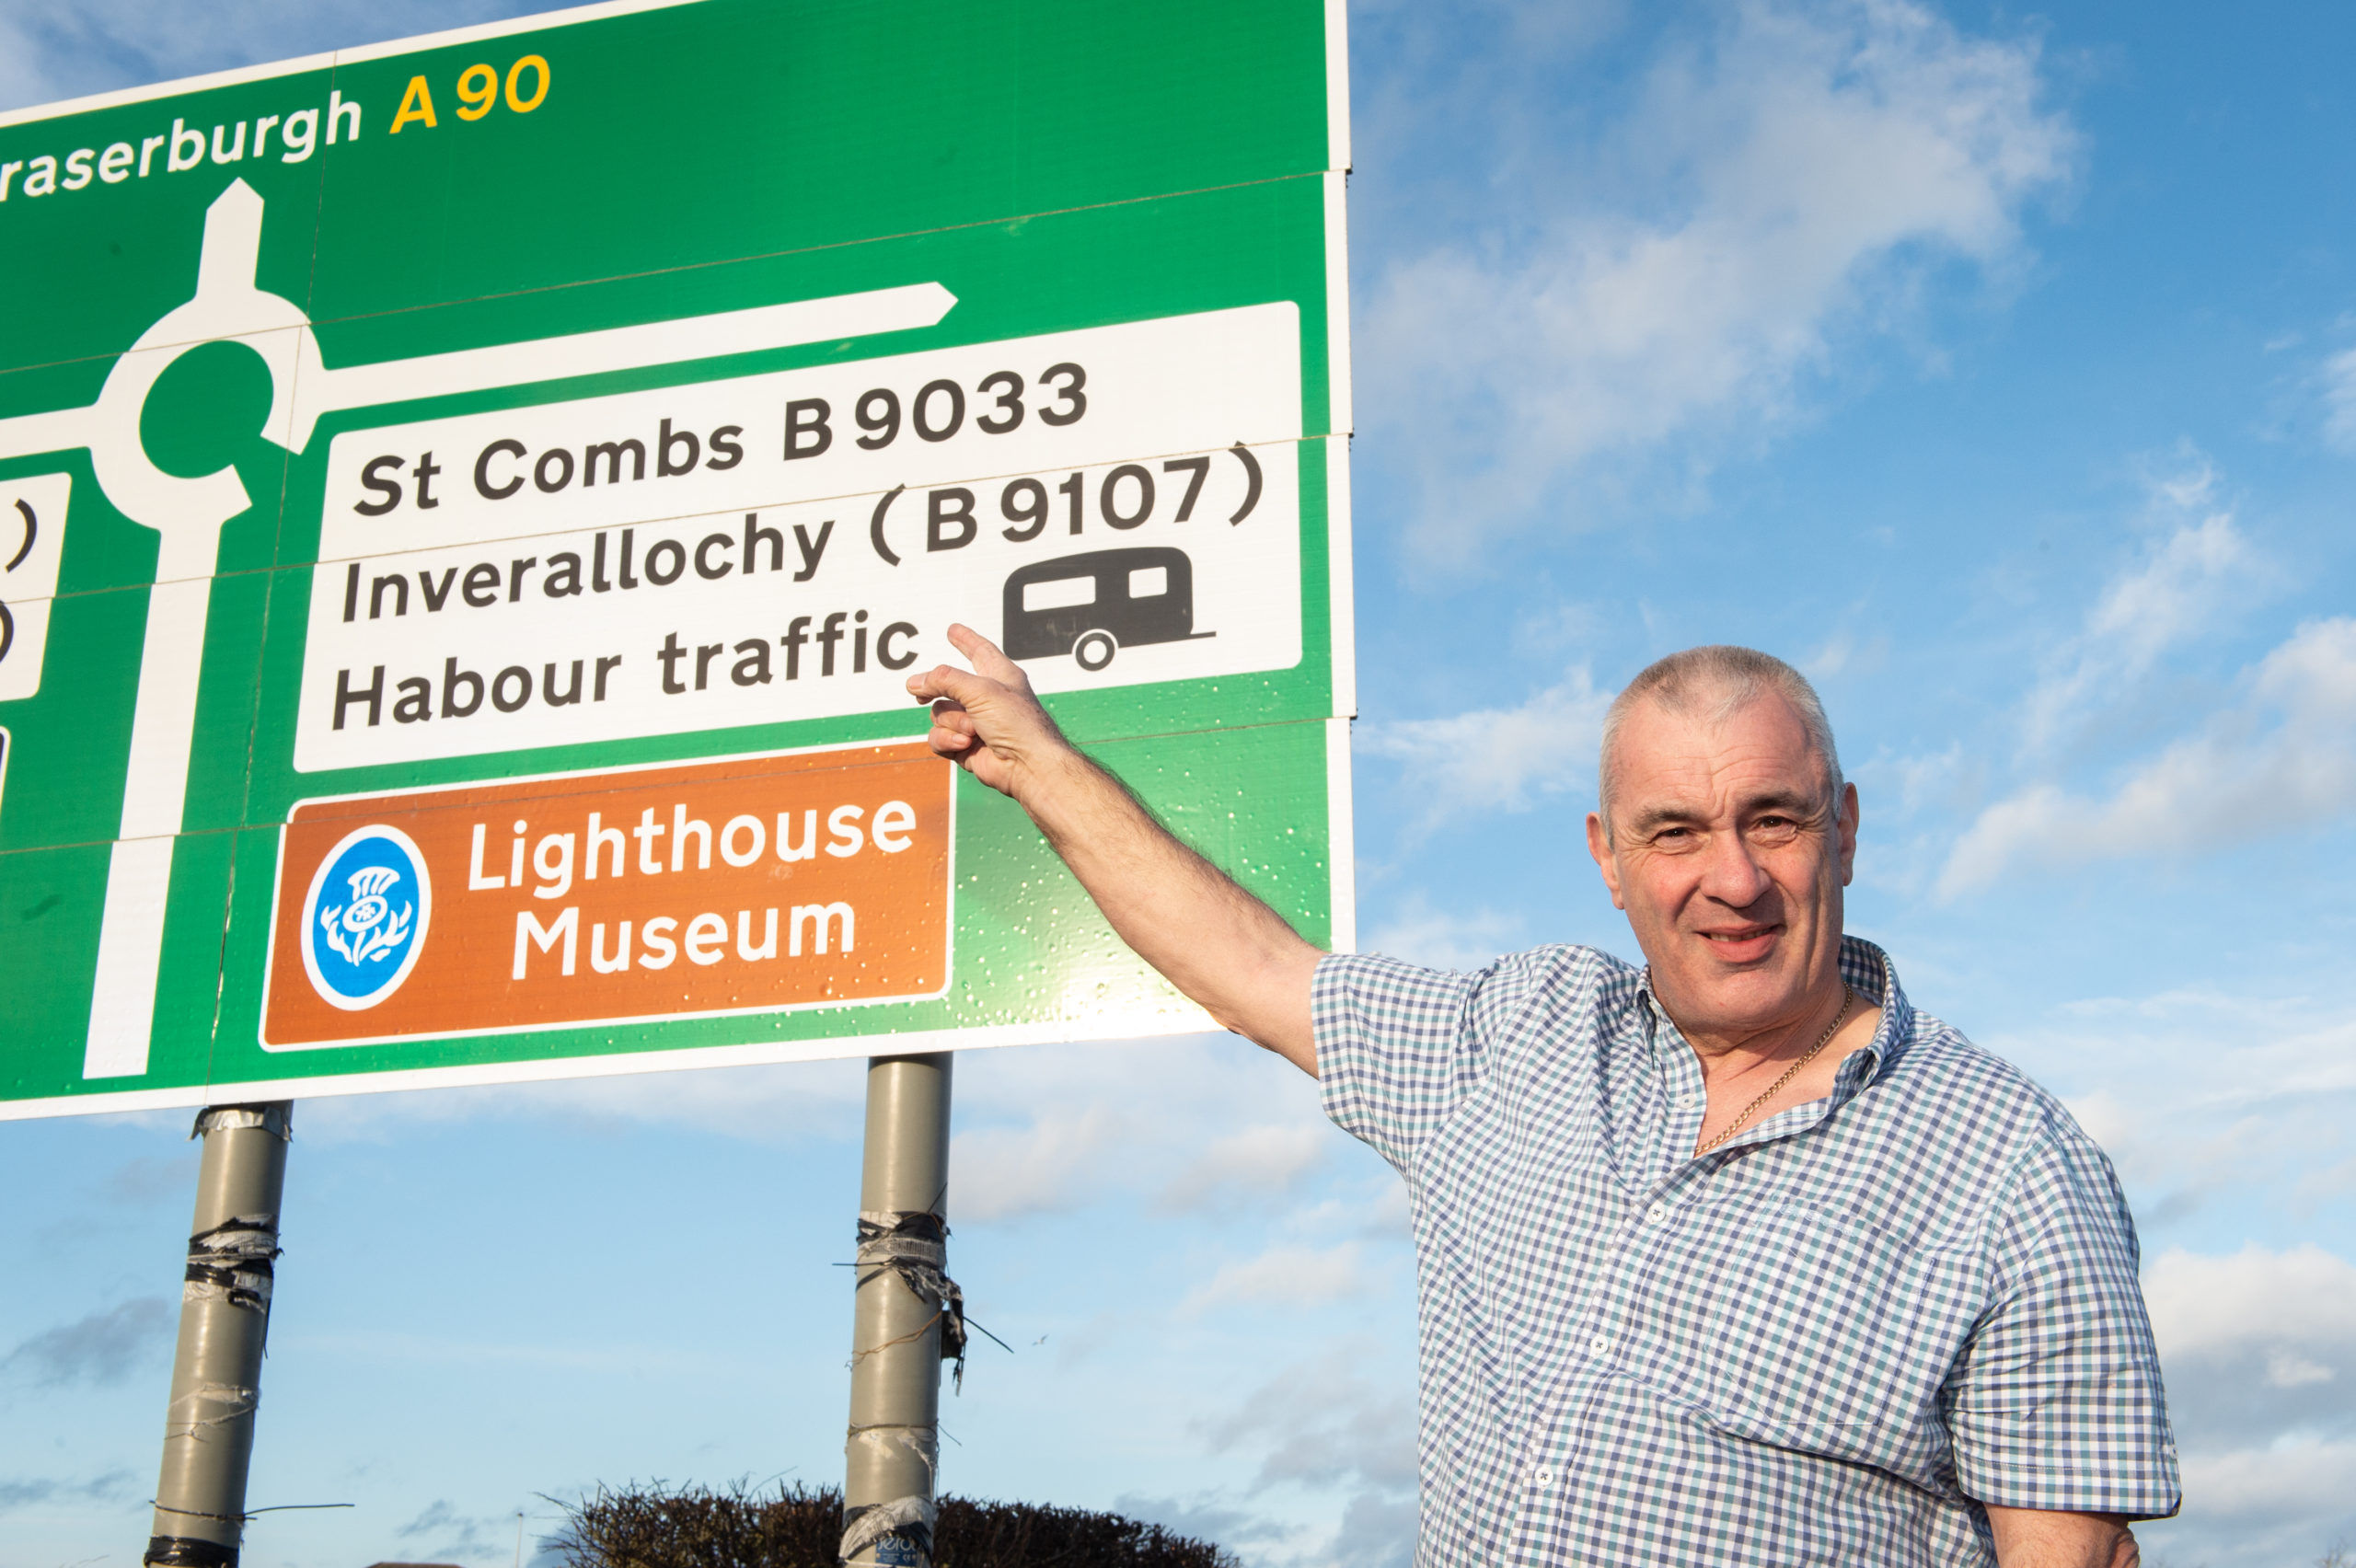 The sign on the entrance to Fraserburgh on the A90 from Peterhead shows the incorrectly spelt word Harbour. Coucillor Brian Topping is pictured with the sign.

Pictures by JASON HEDGES